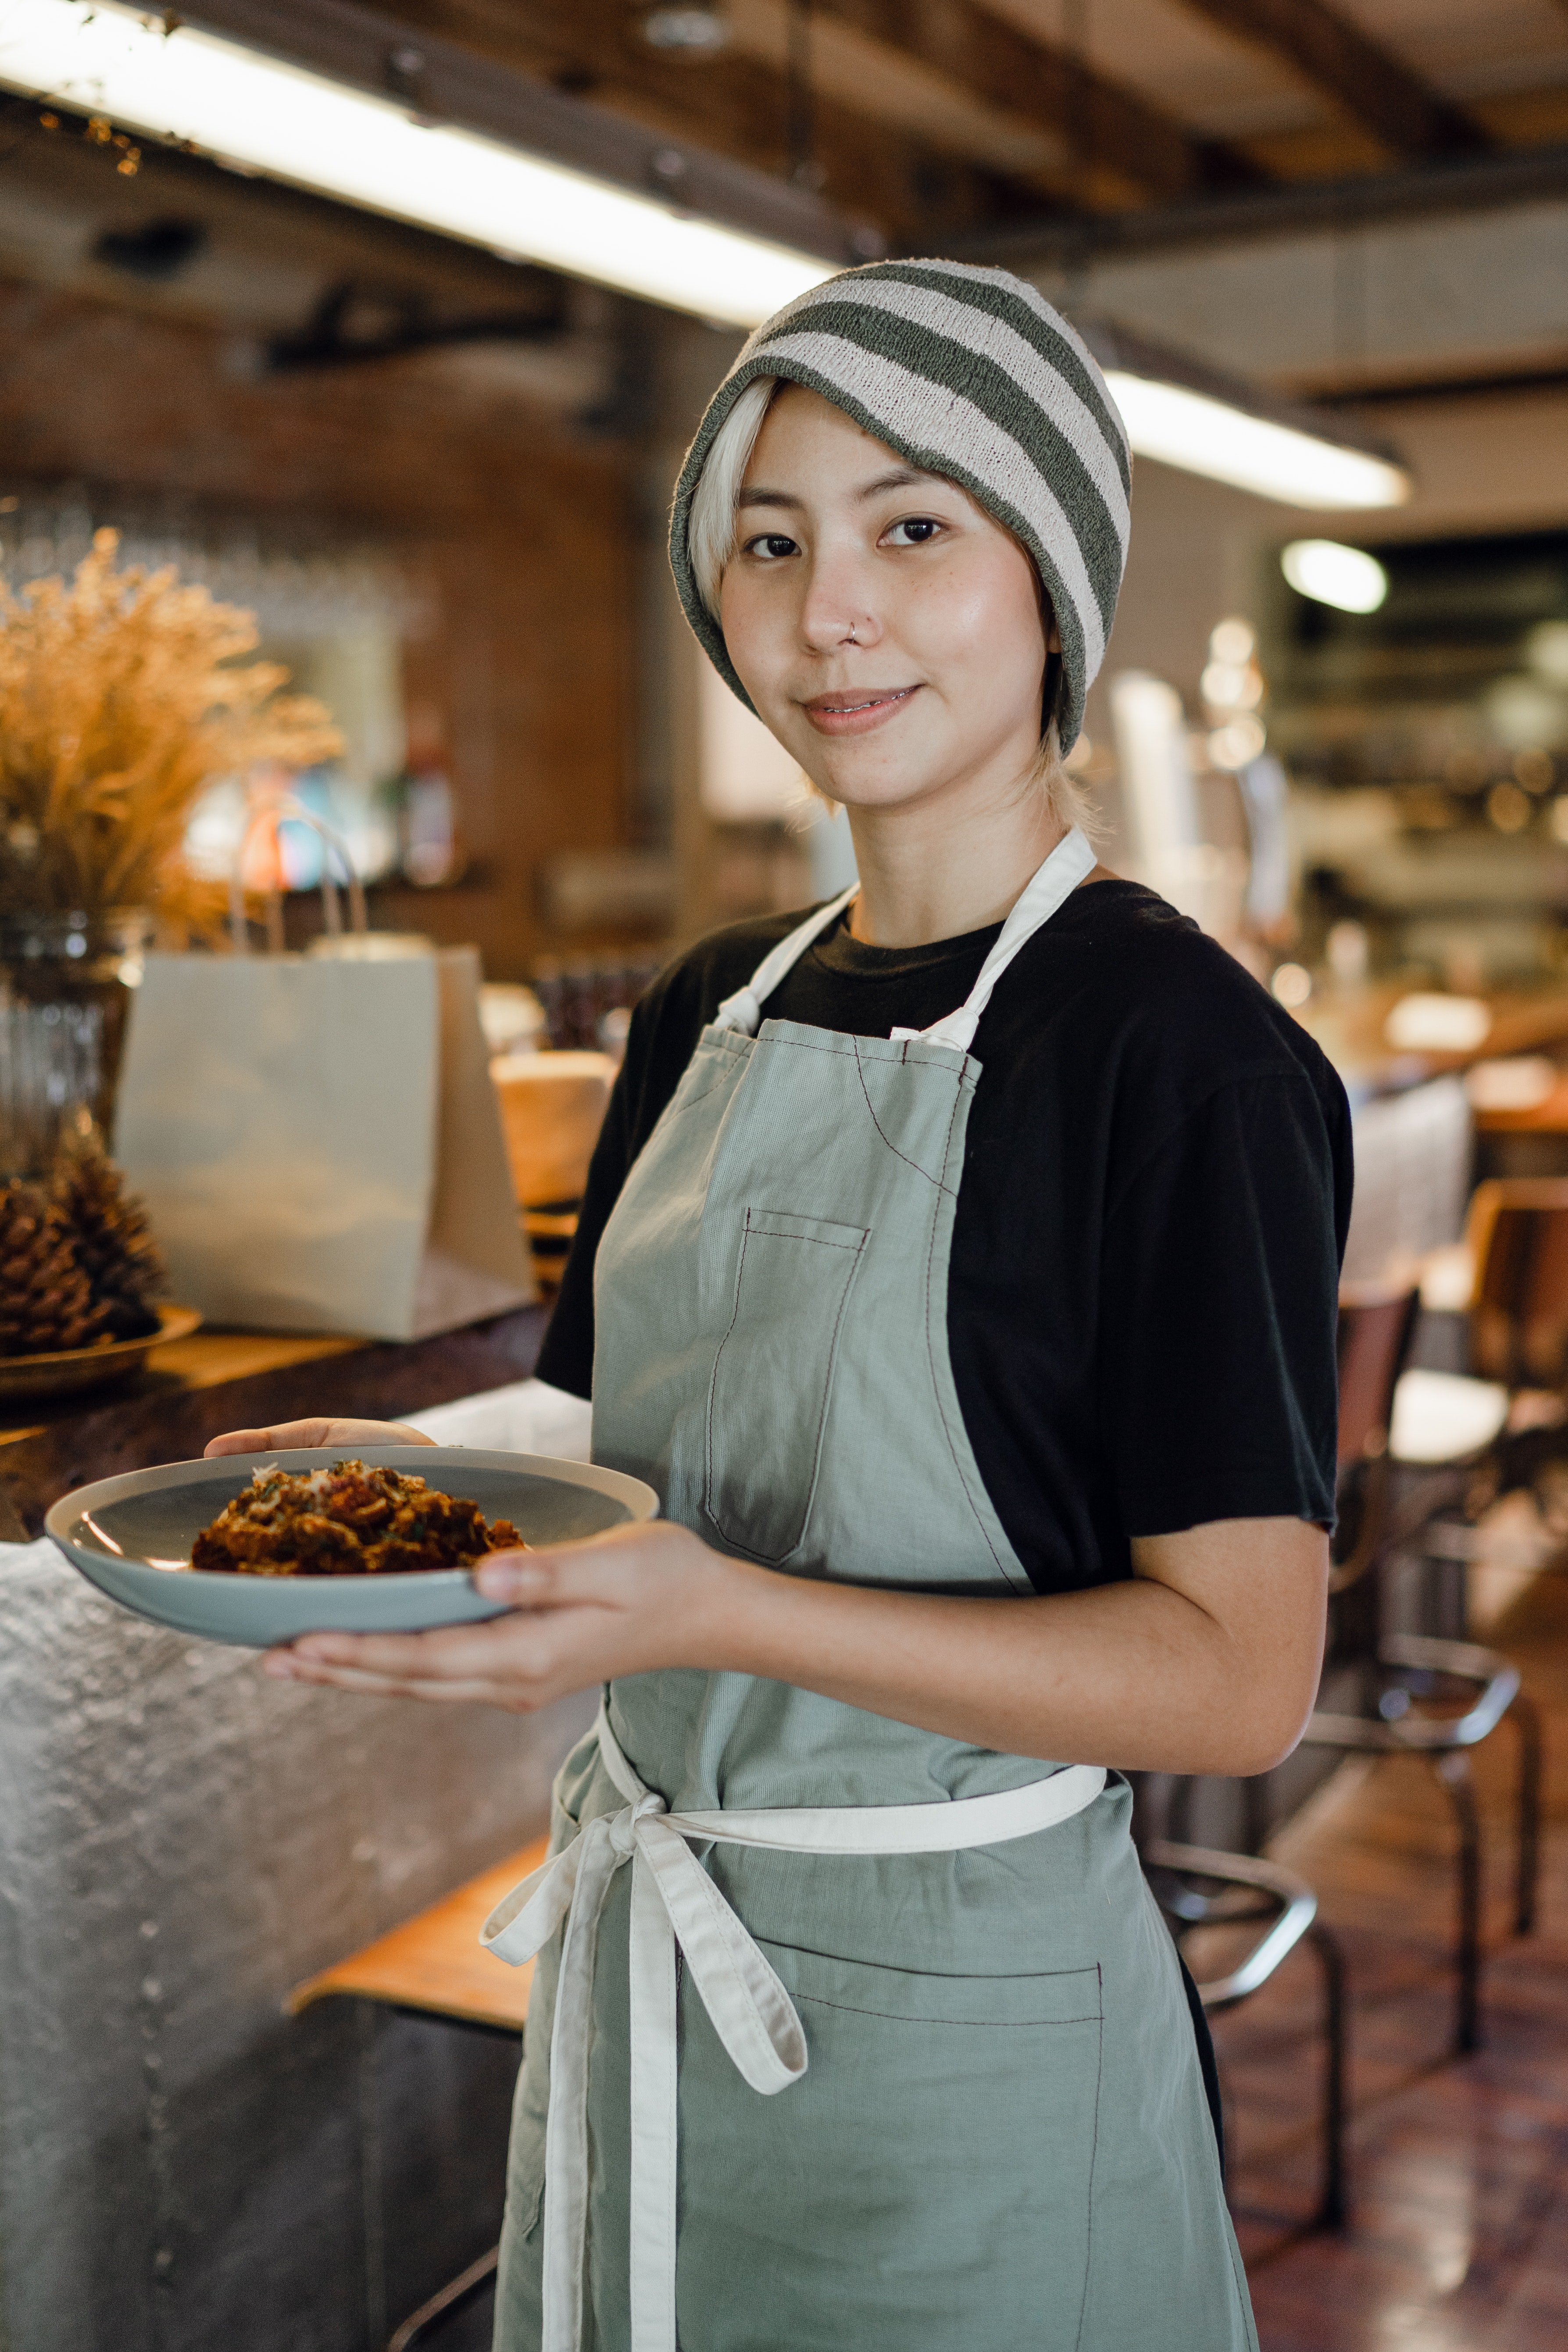  A woman carrying a plate of food in a restaurant. | Photo: Pexels/Ketut Subiyanto